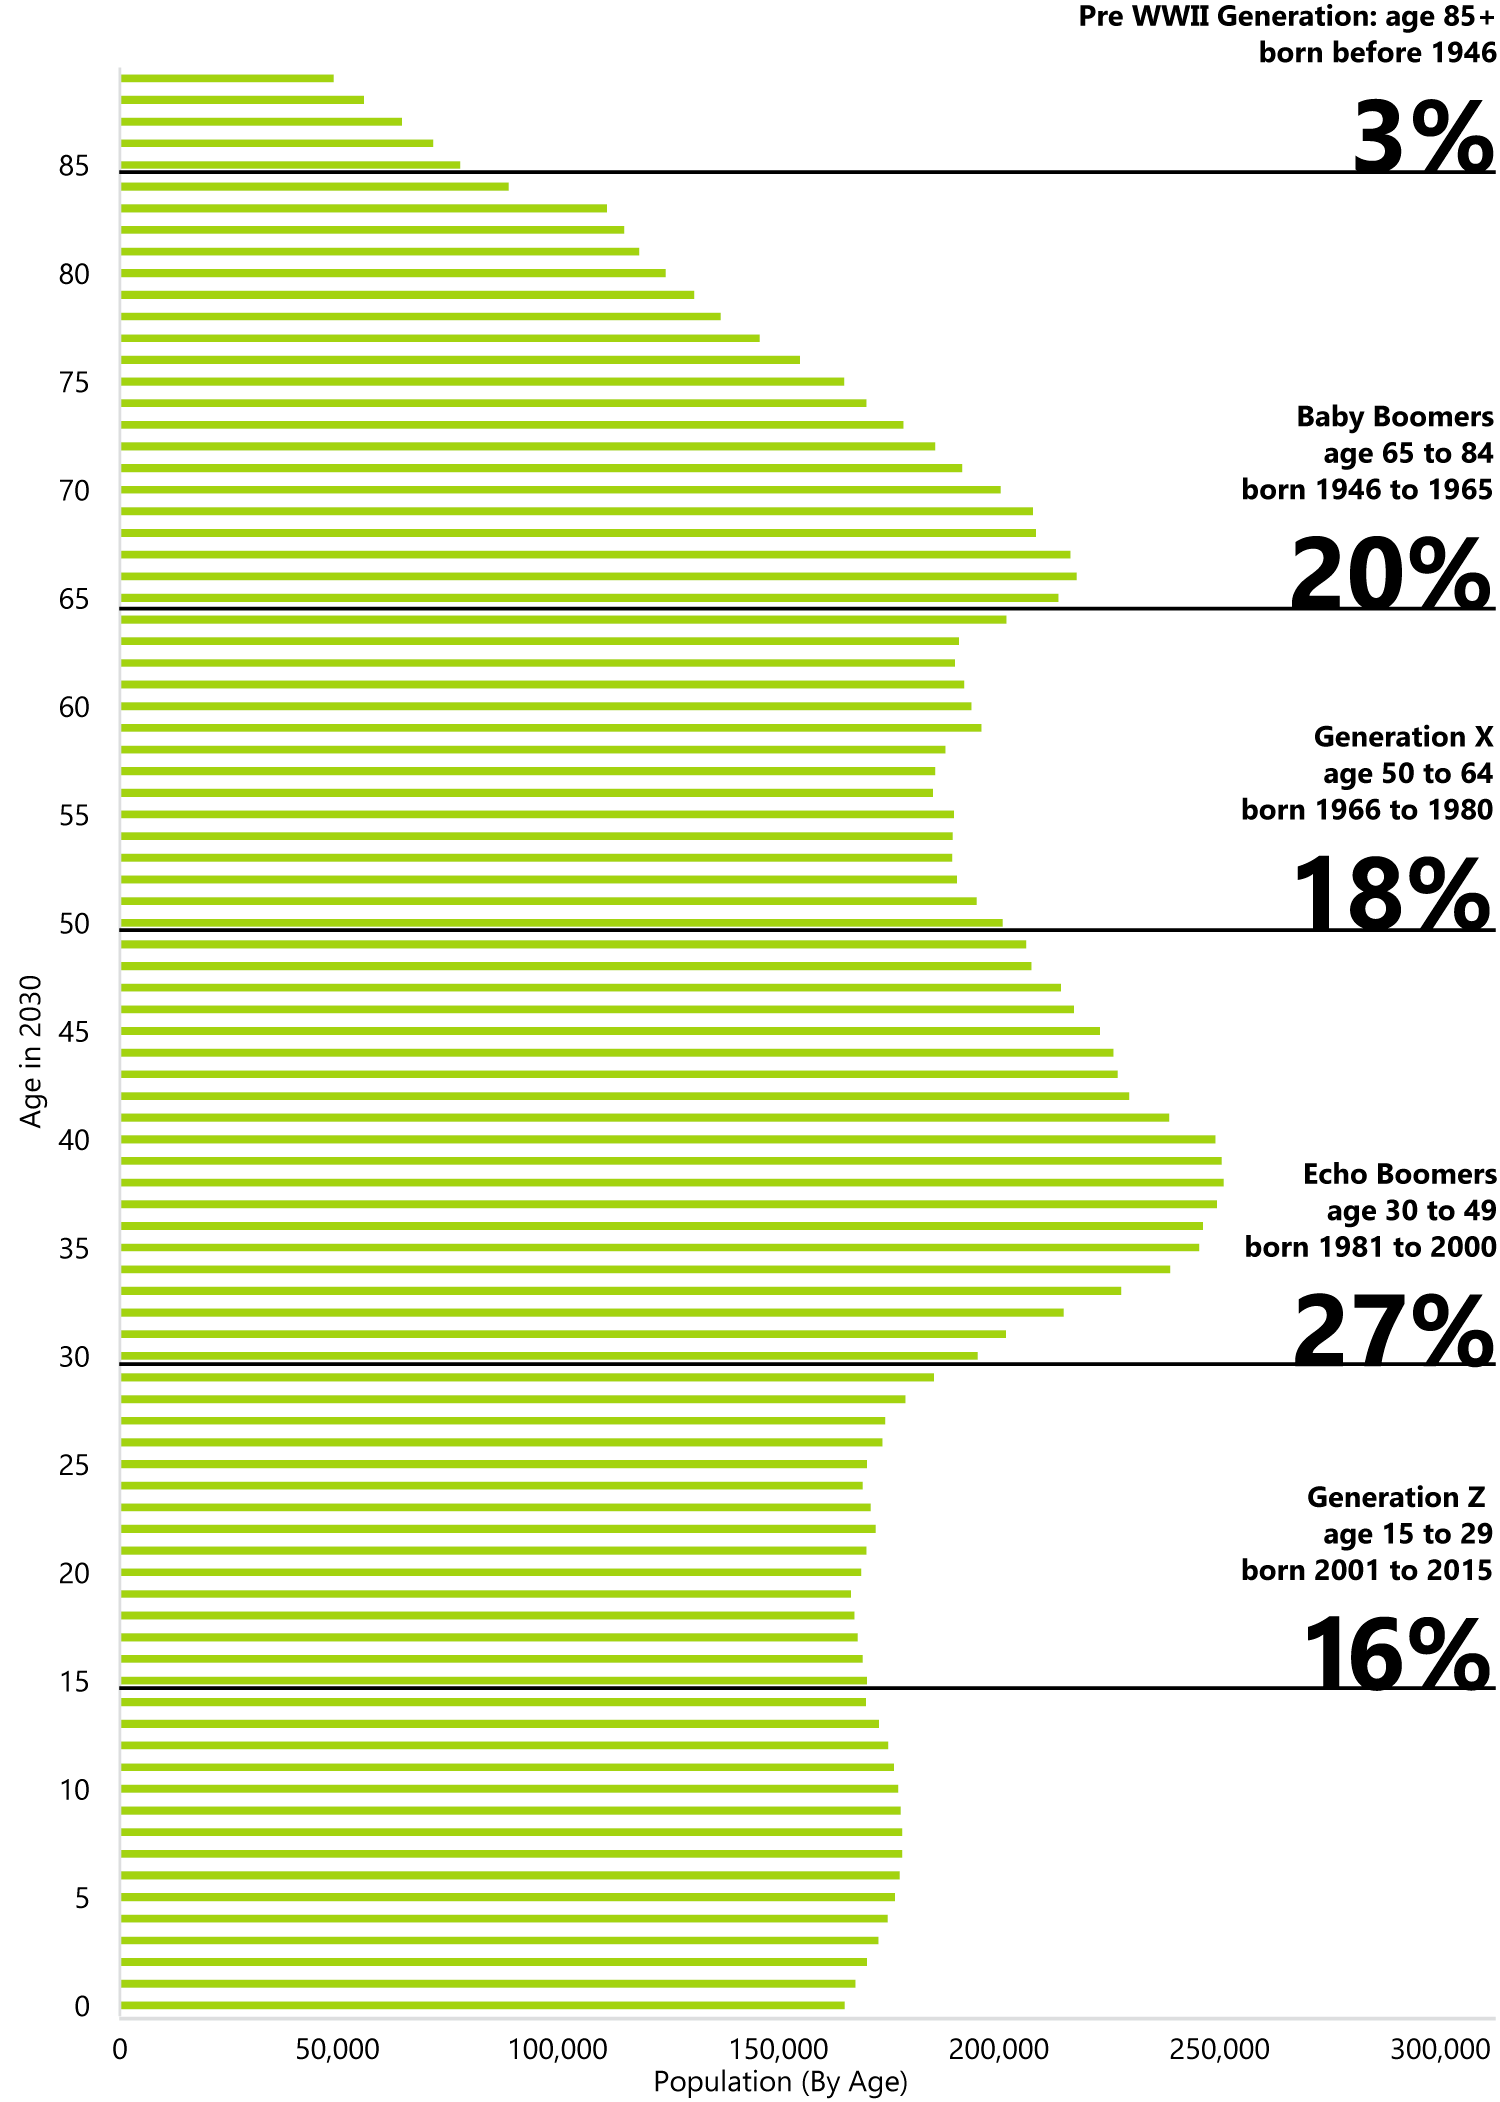 Ontario’s Age Distribution in 2030